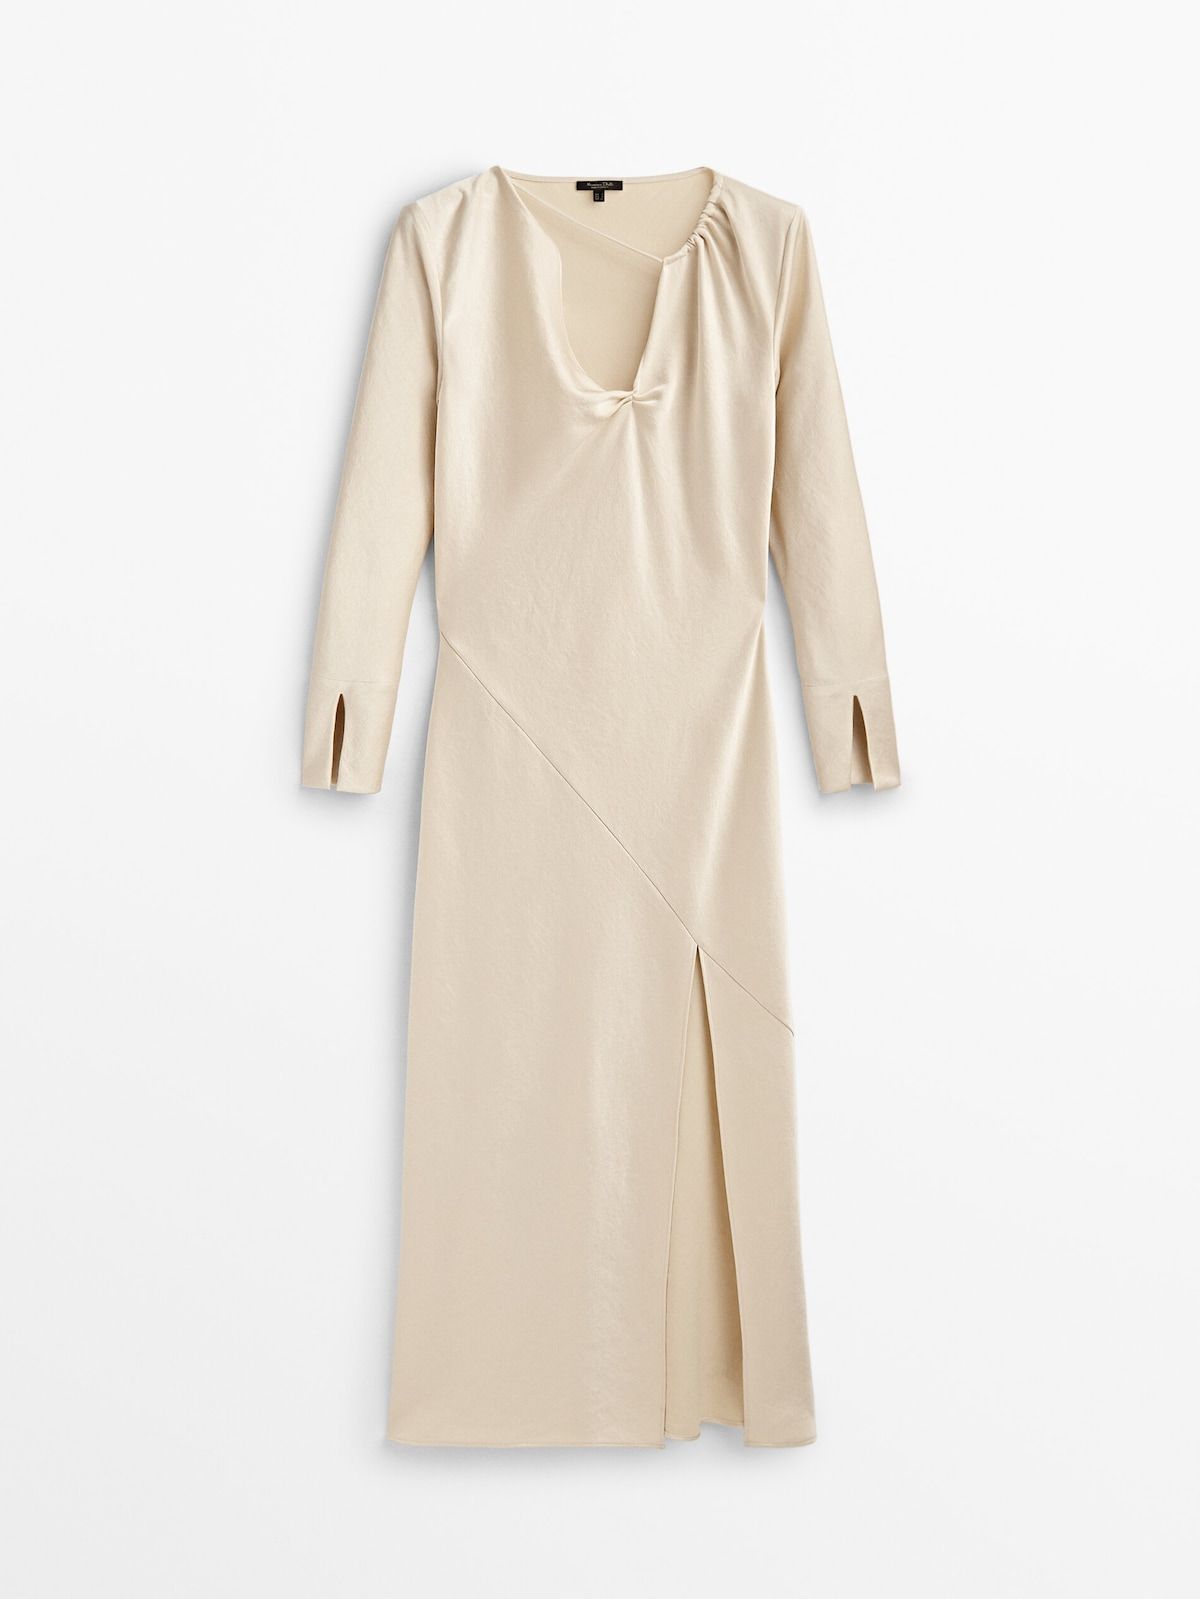 Long satin dress with cut-out detail | Massimo Dutti (US)